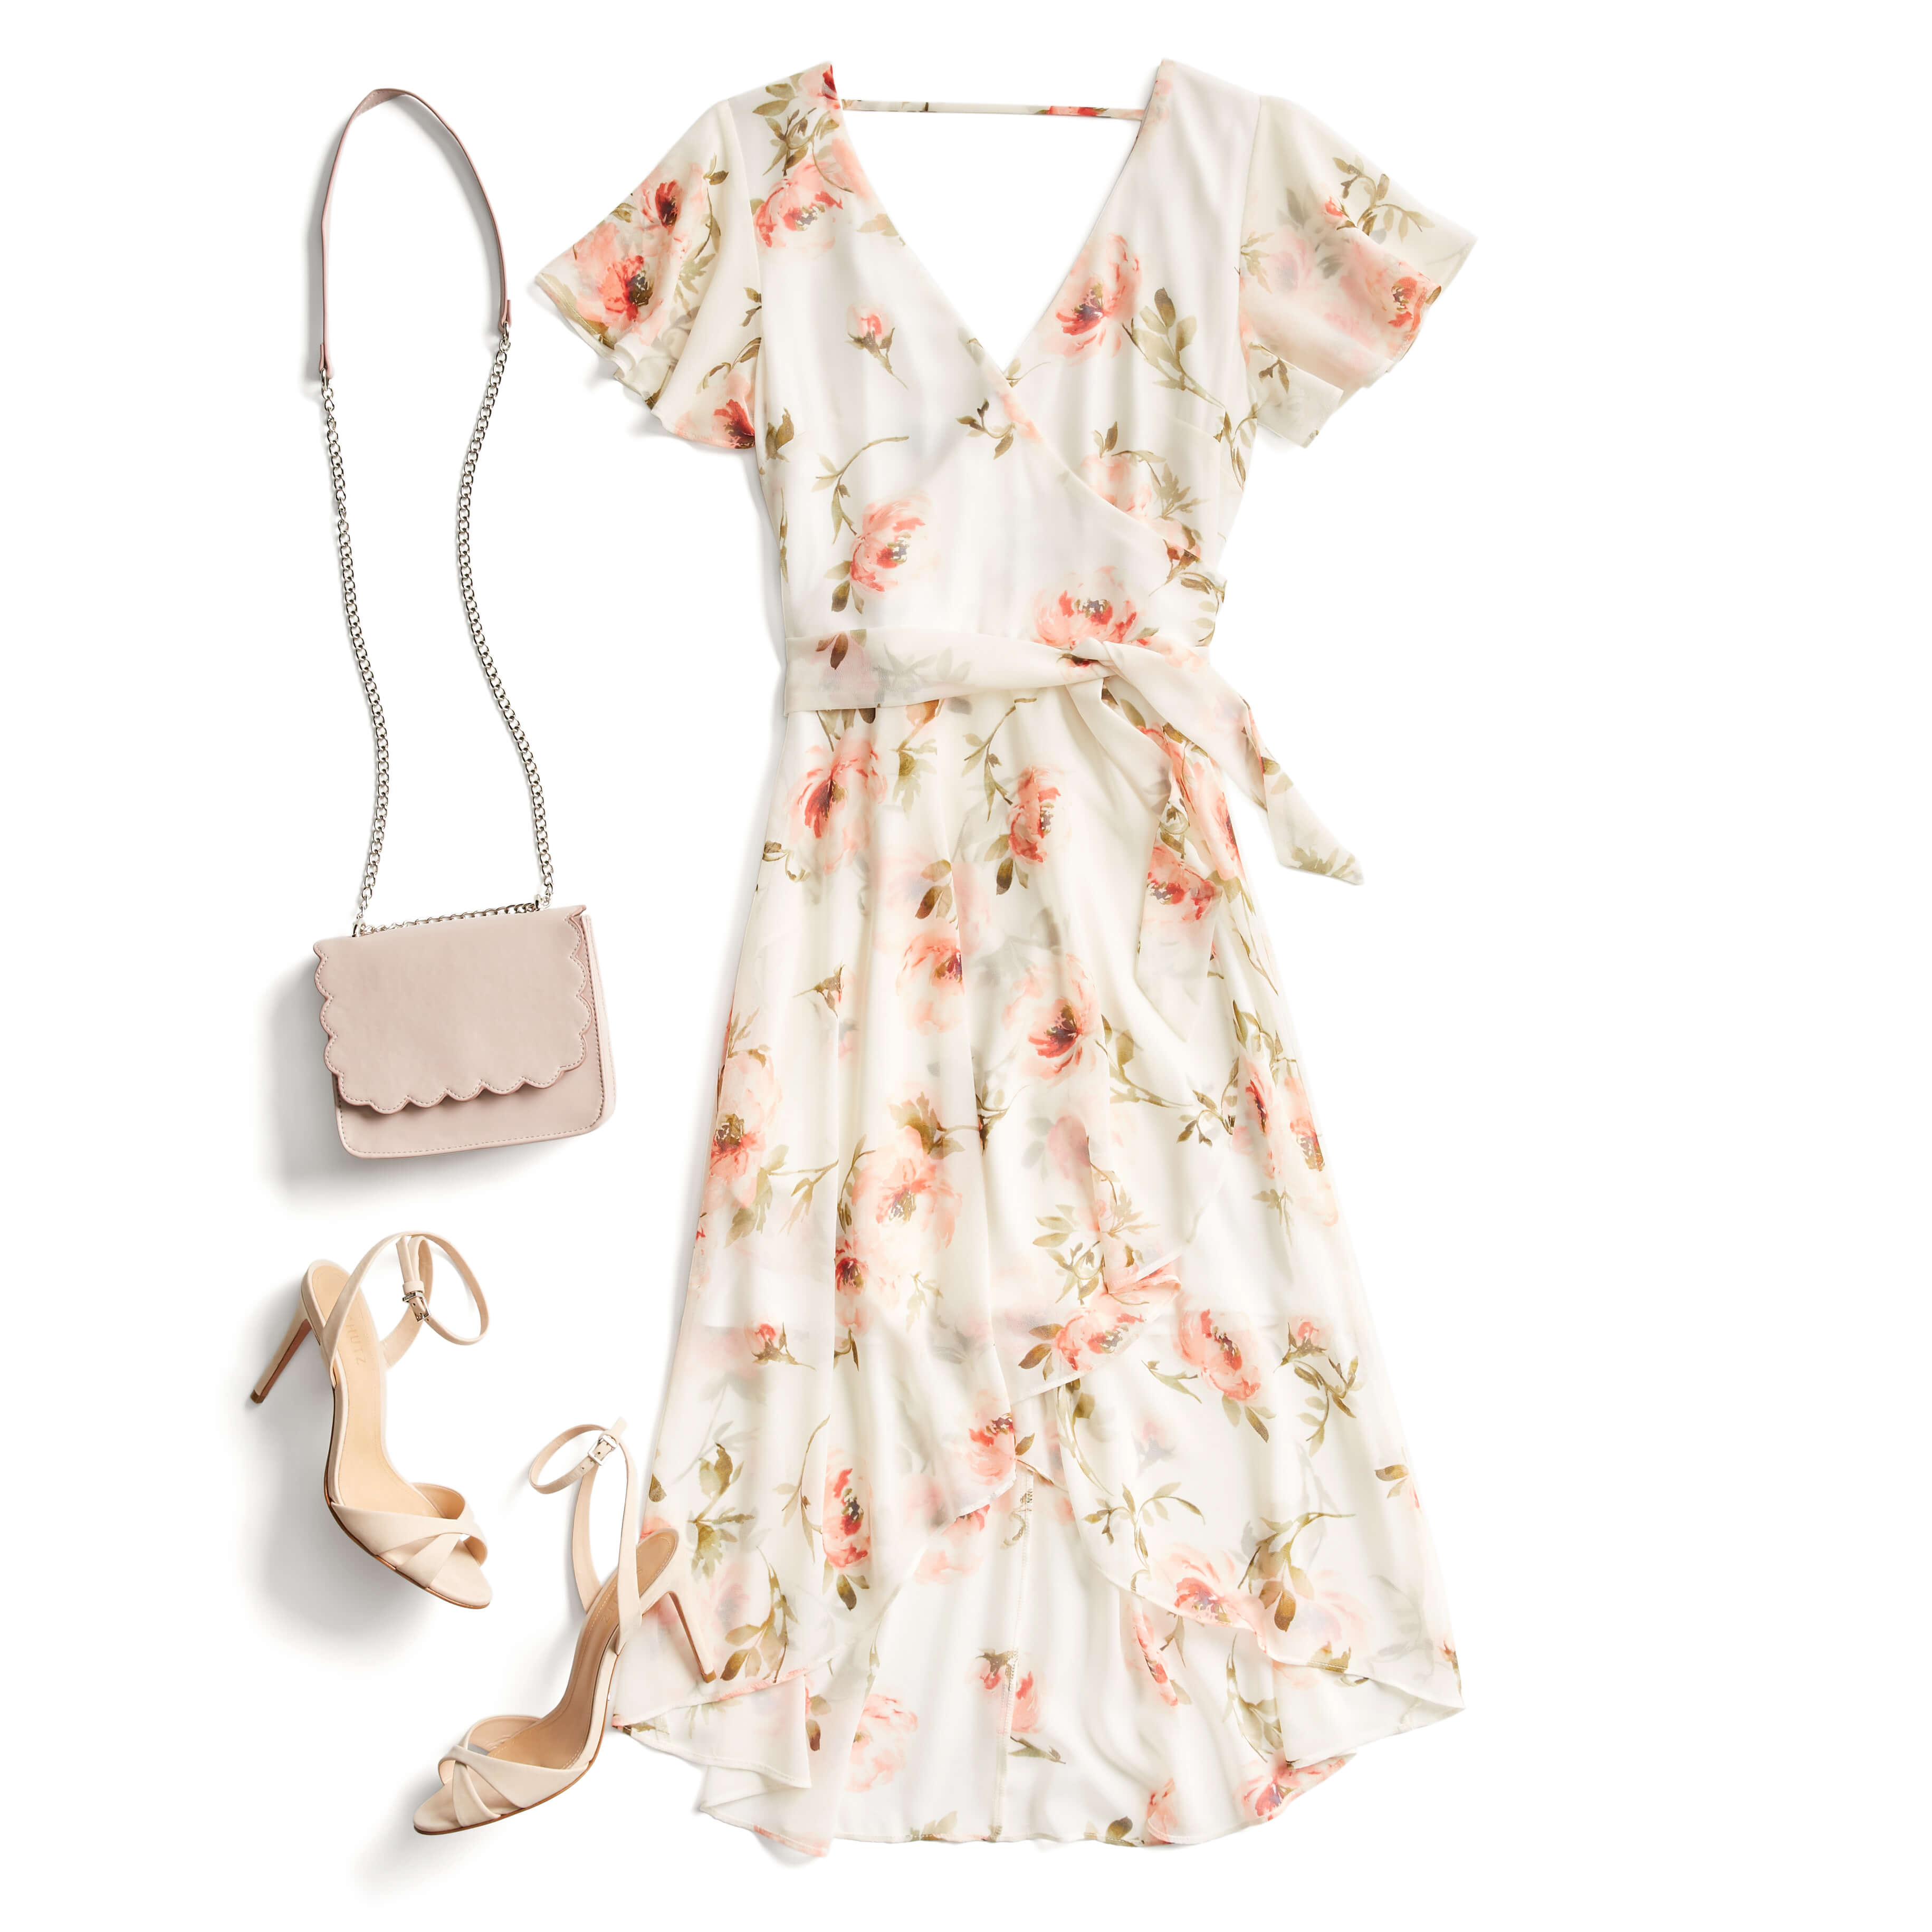 What to Wear to Bridal Shower